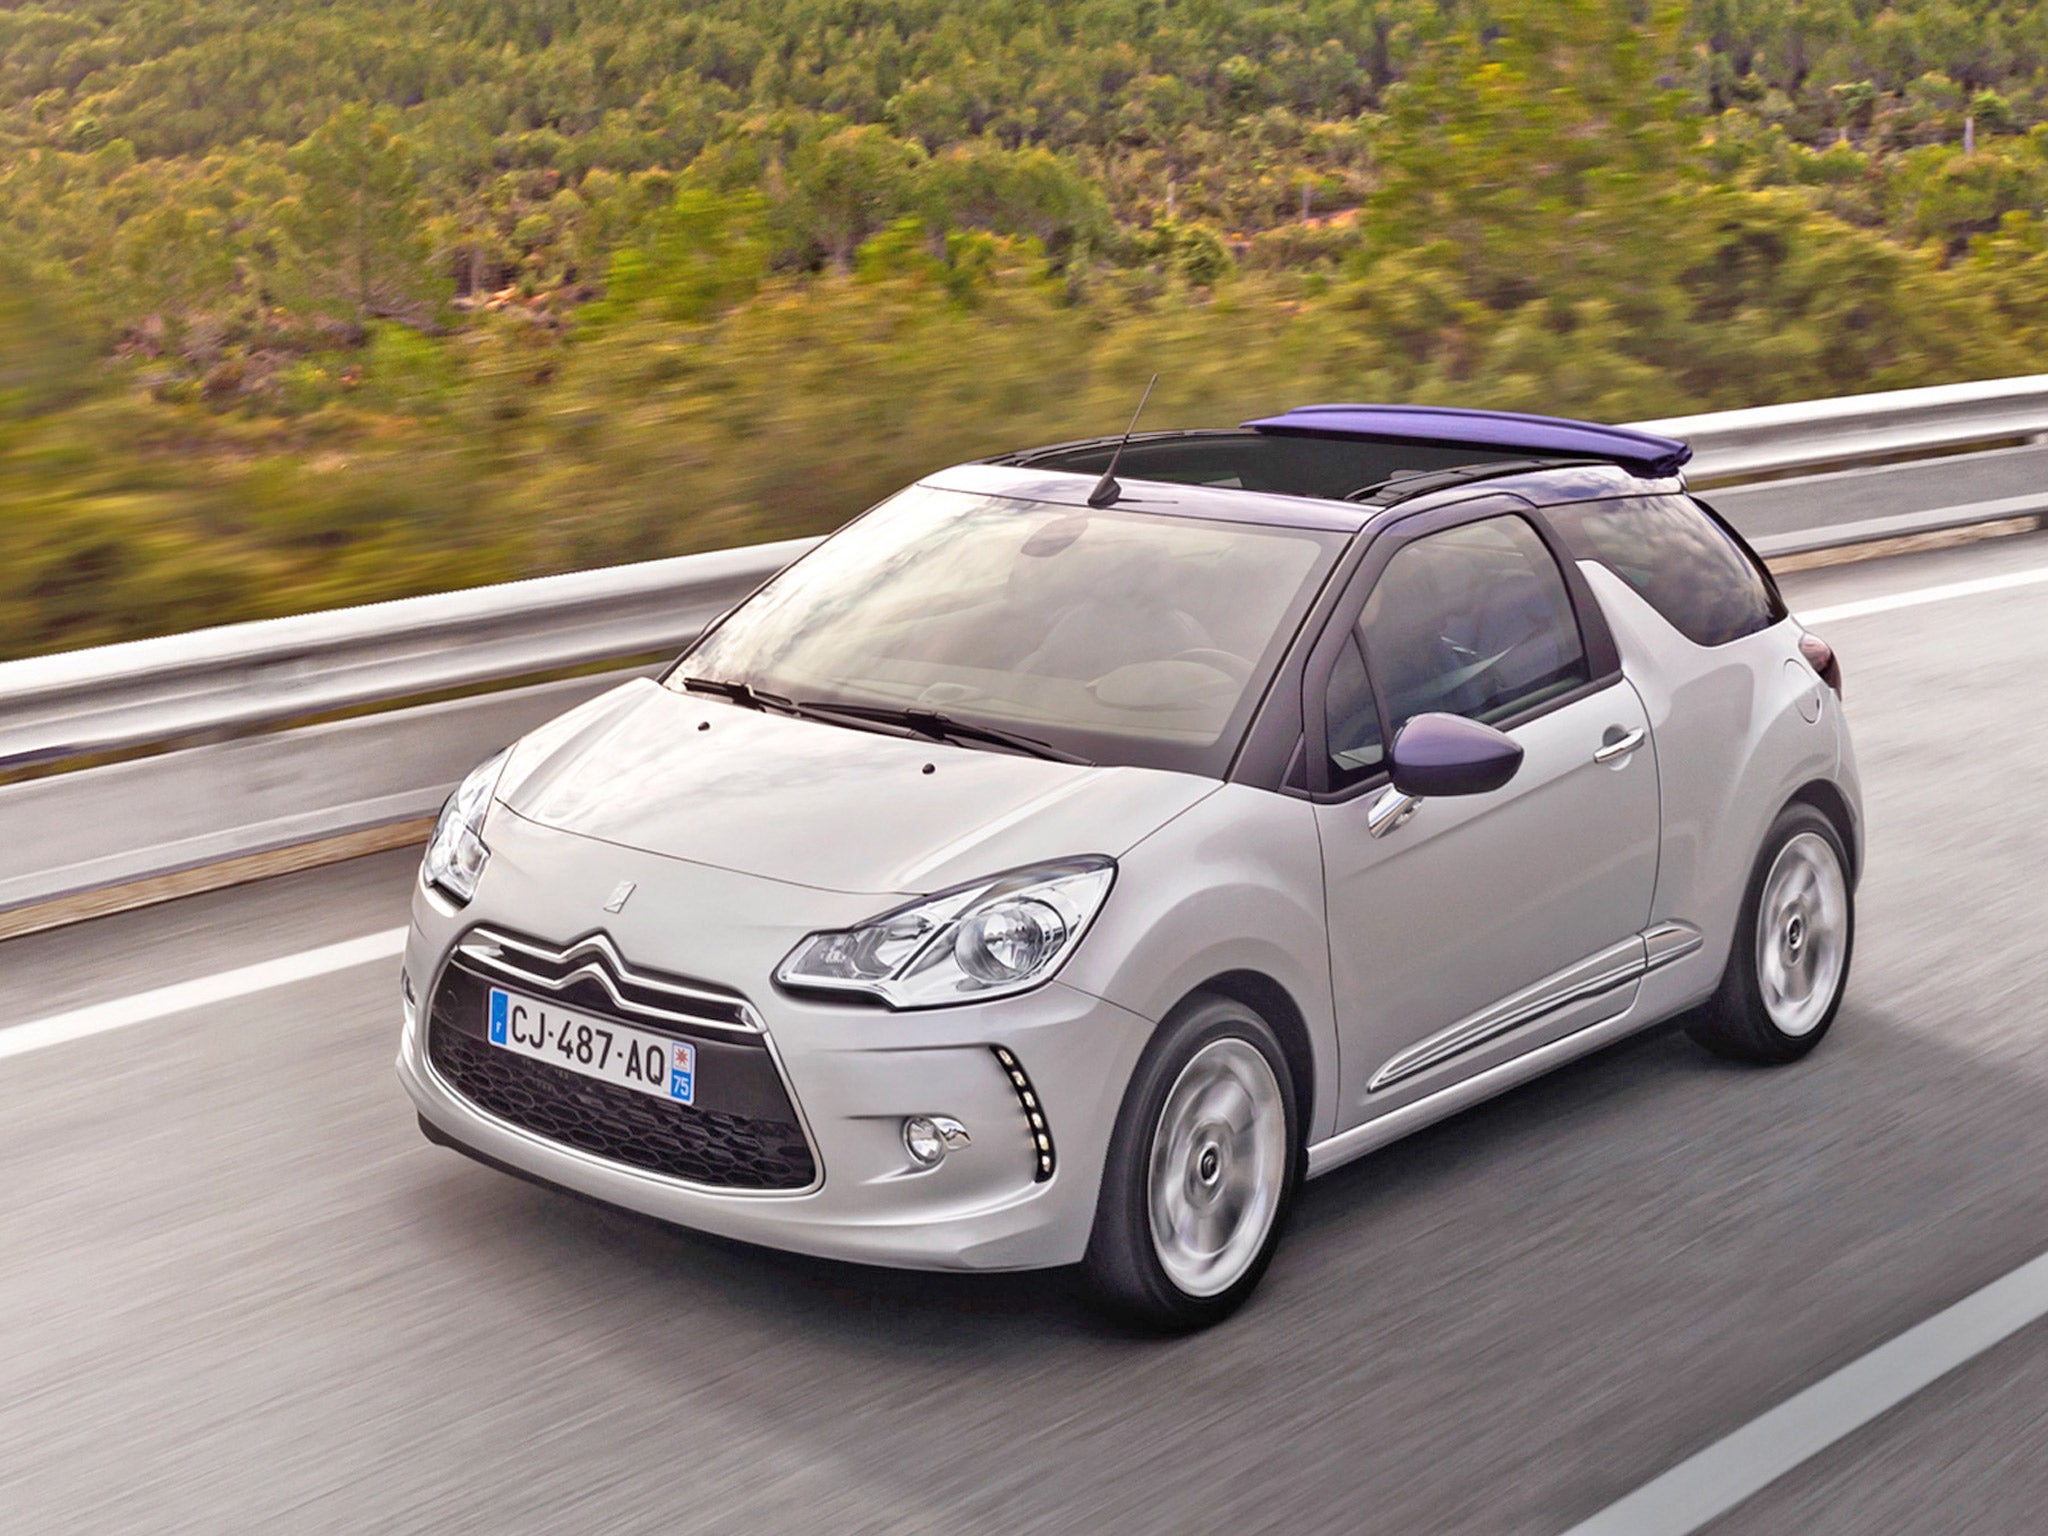 Citroën's DS 3 Is an Upscale French Small Hatchback